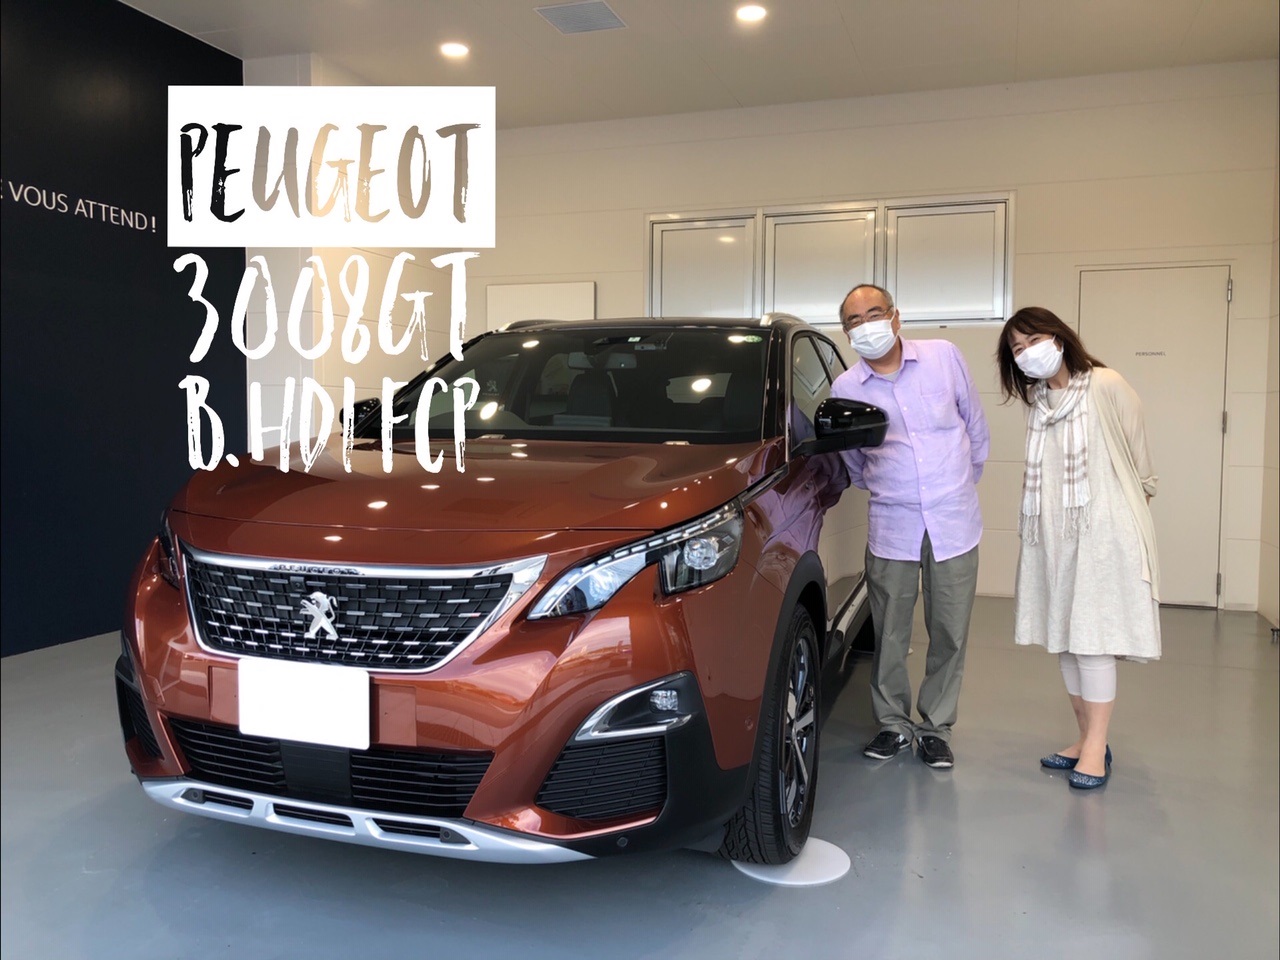 PEUGEOT 3008GT Blue HDi FCPpkgをご納車させて頂きました。